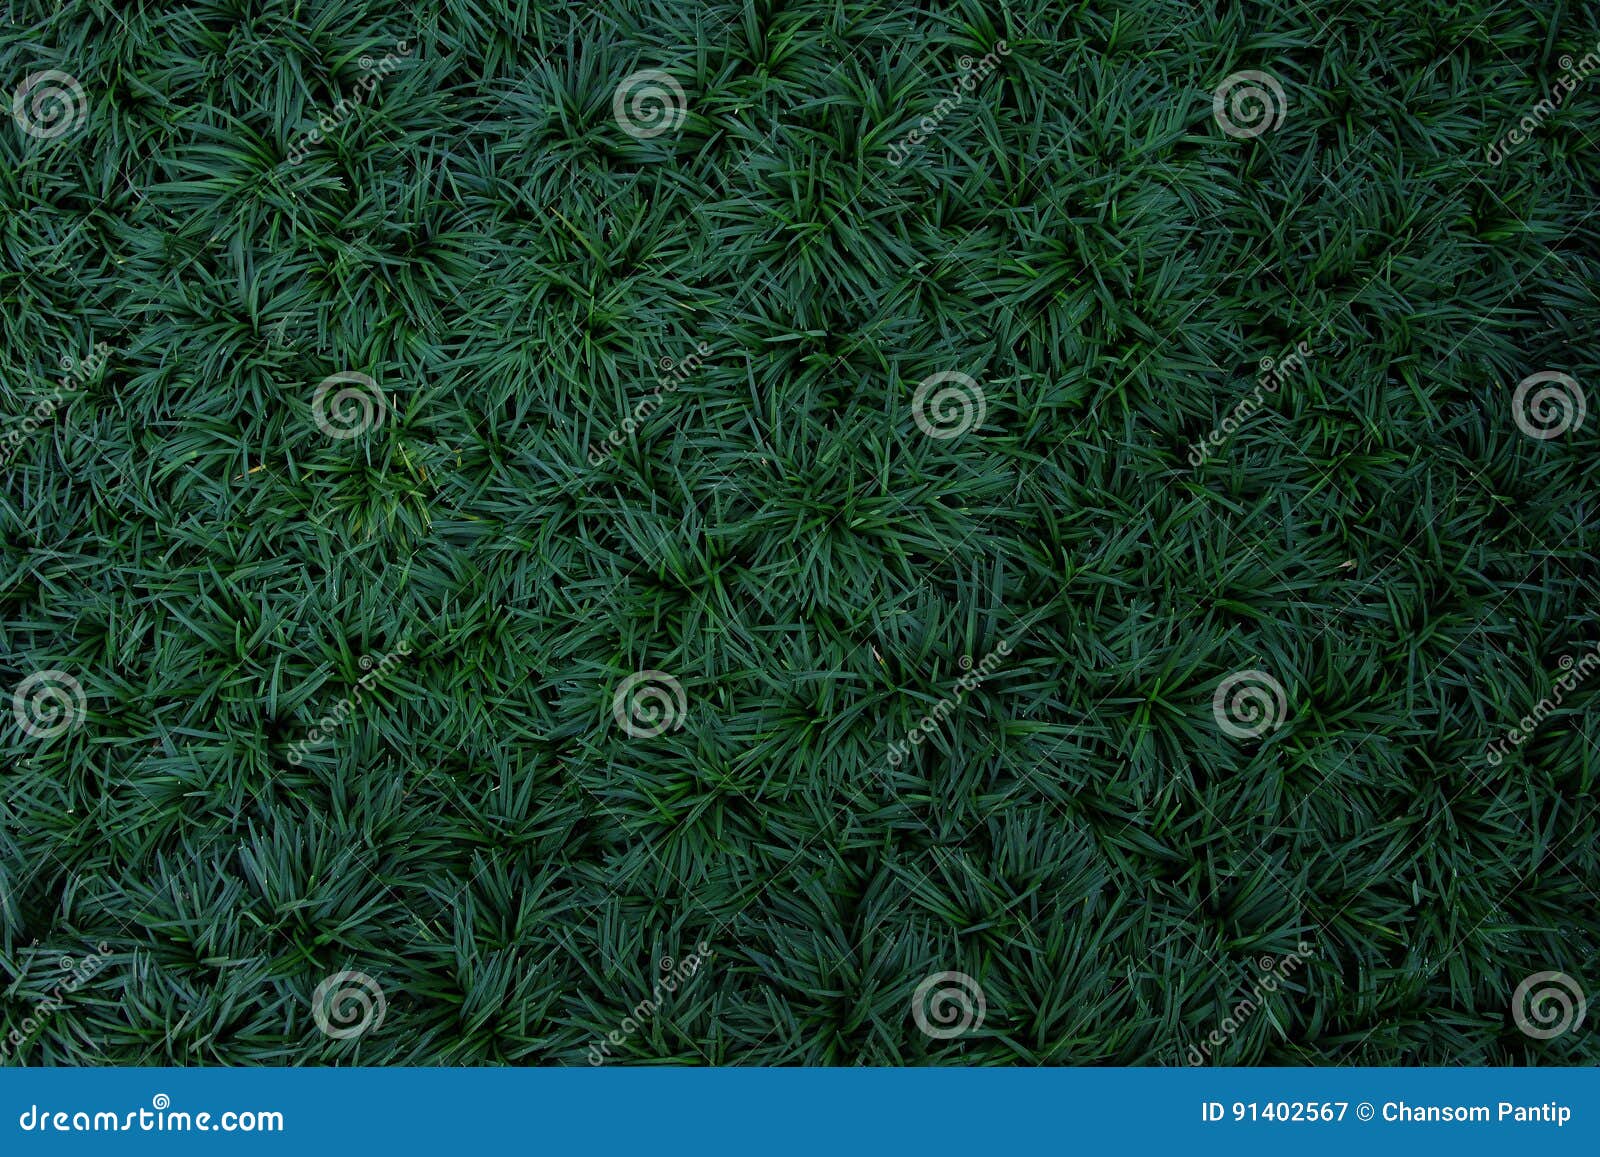 dark green leaves of ground cover plant, mini mondo grass or snakes beard (ophiopogon japonicus), abstract texture background.